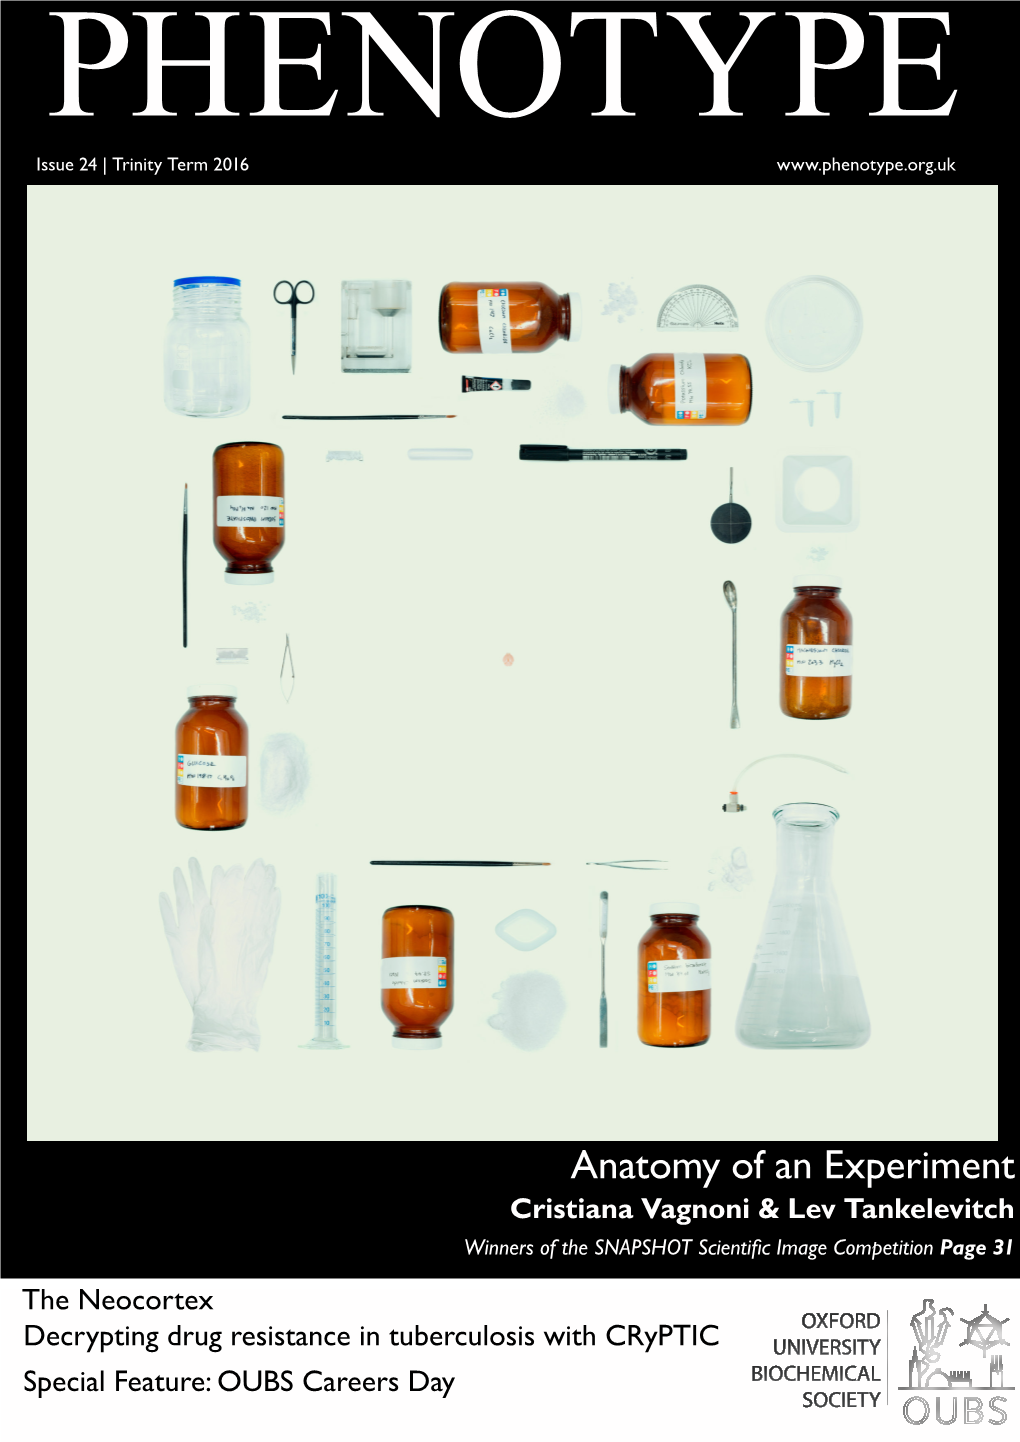 Anatomy of an Experiment